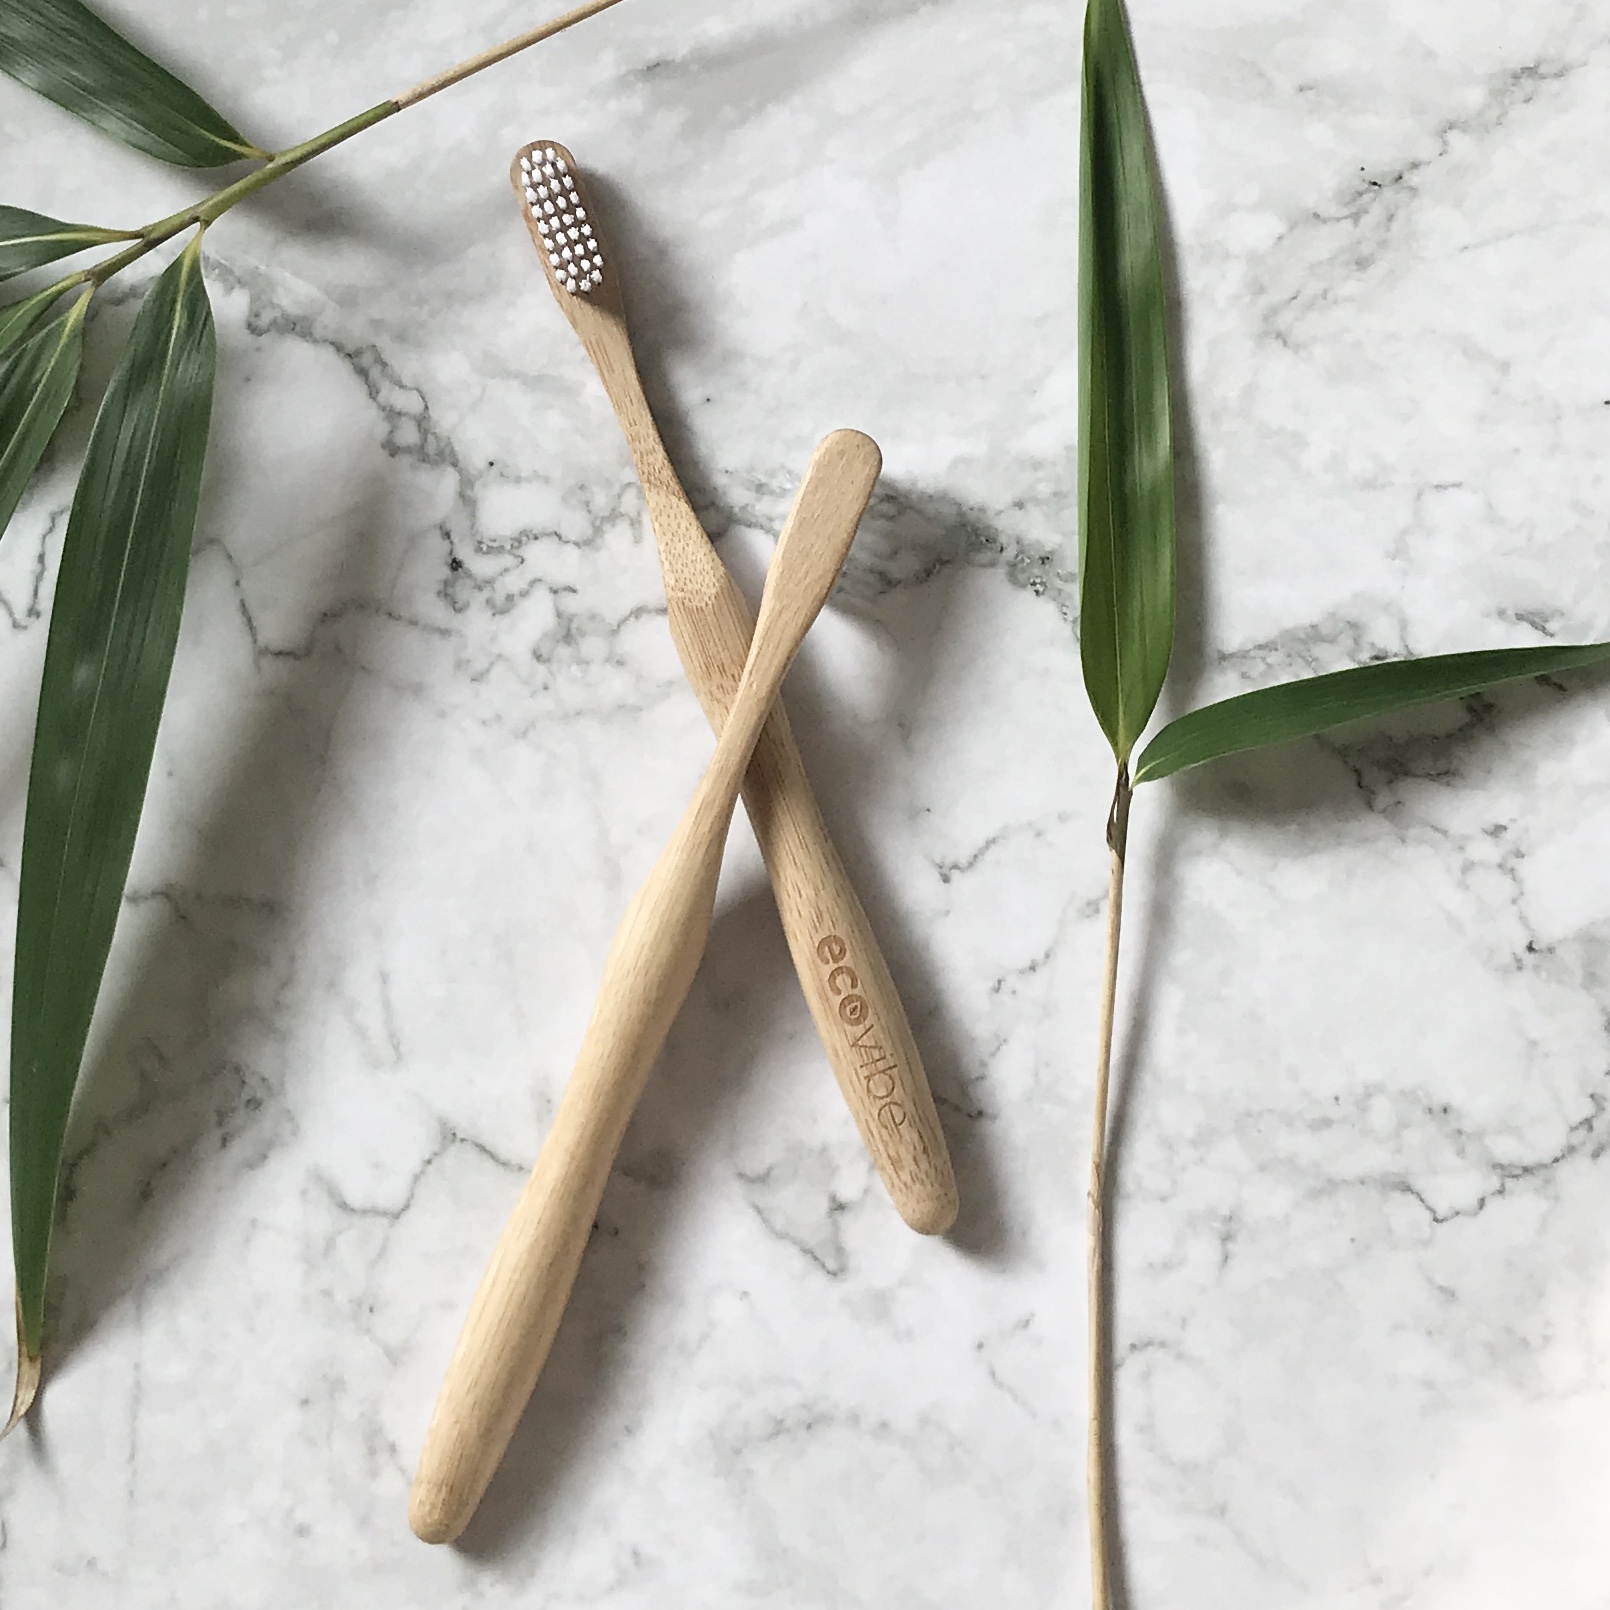 Bamboo toothbrush with natural bristles